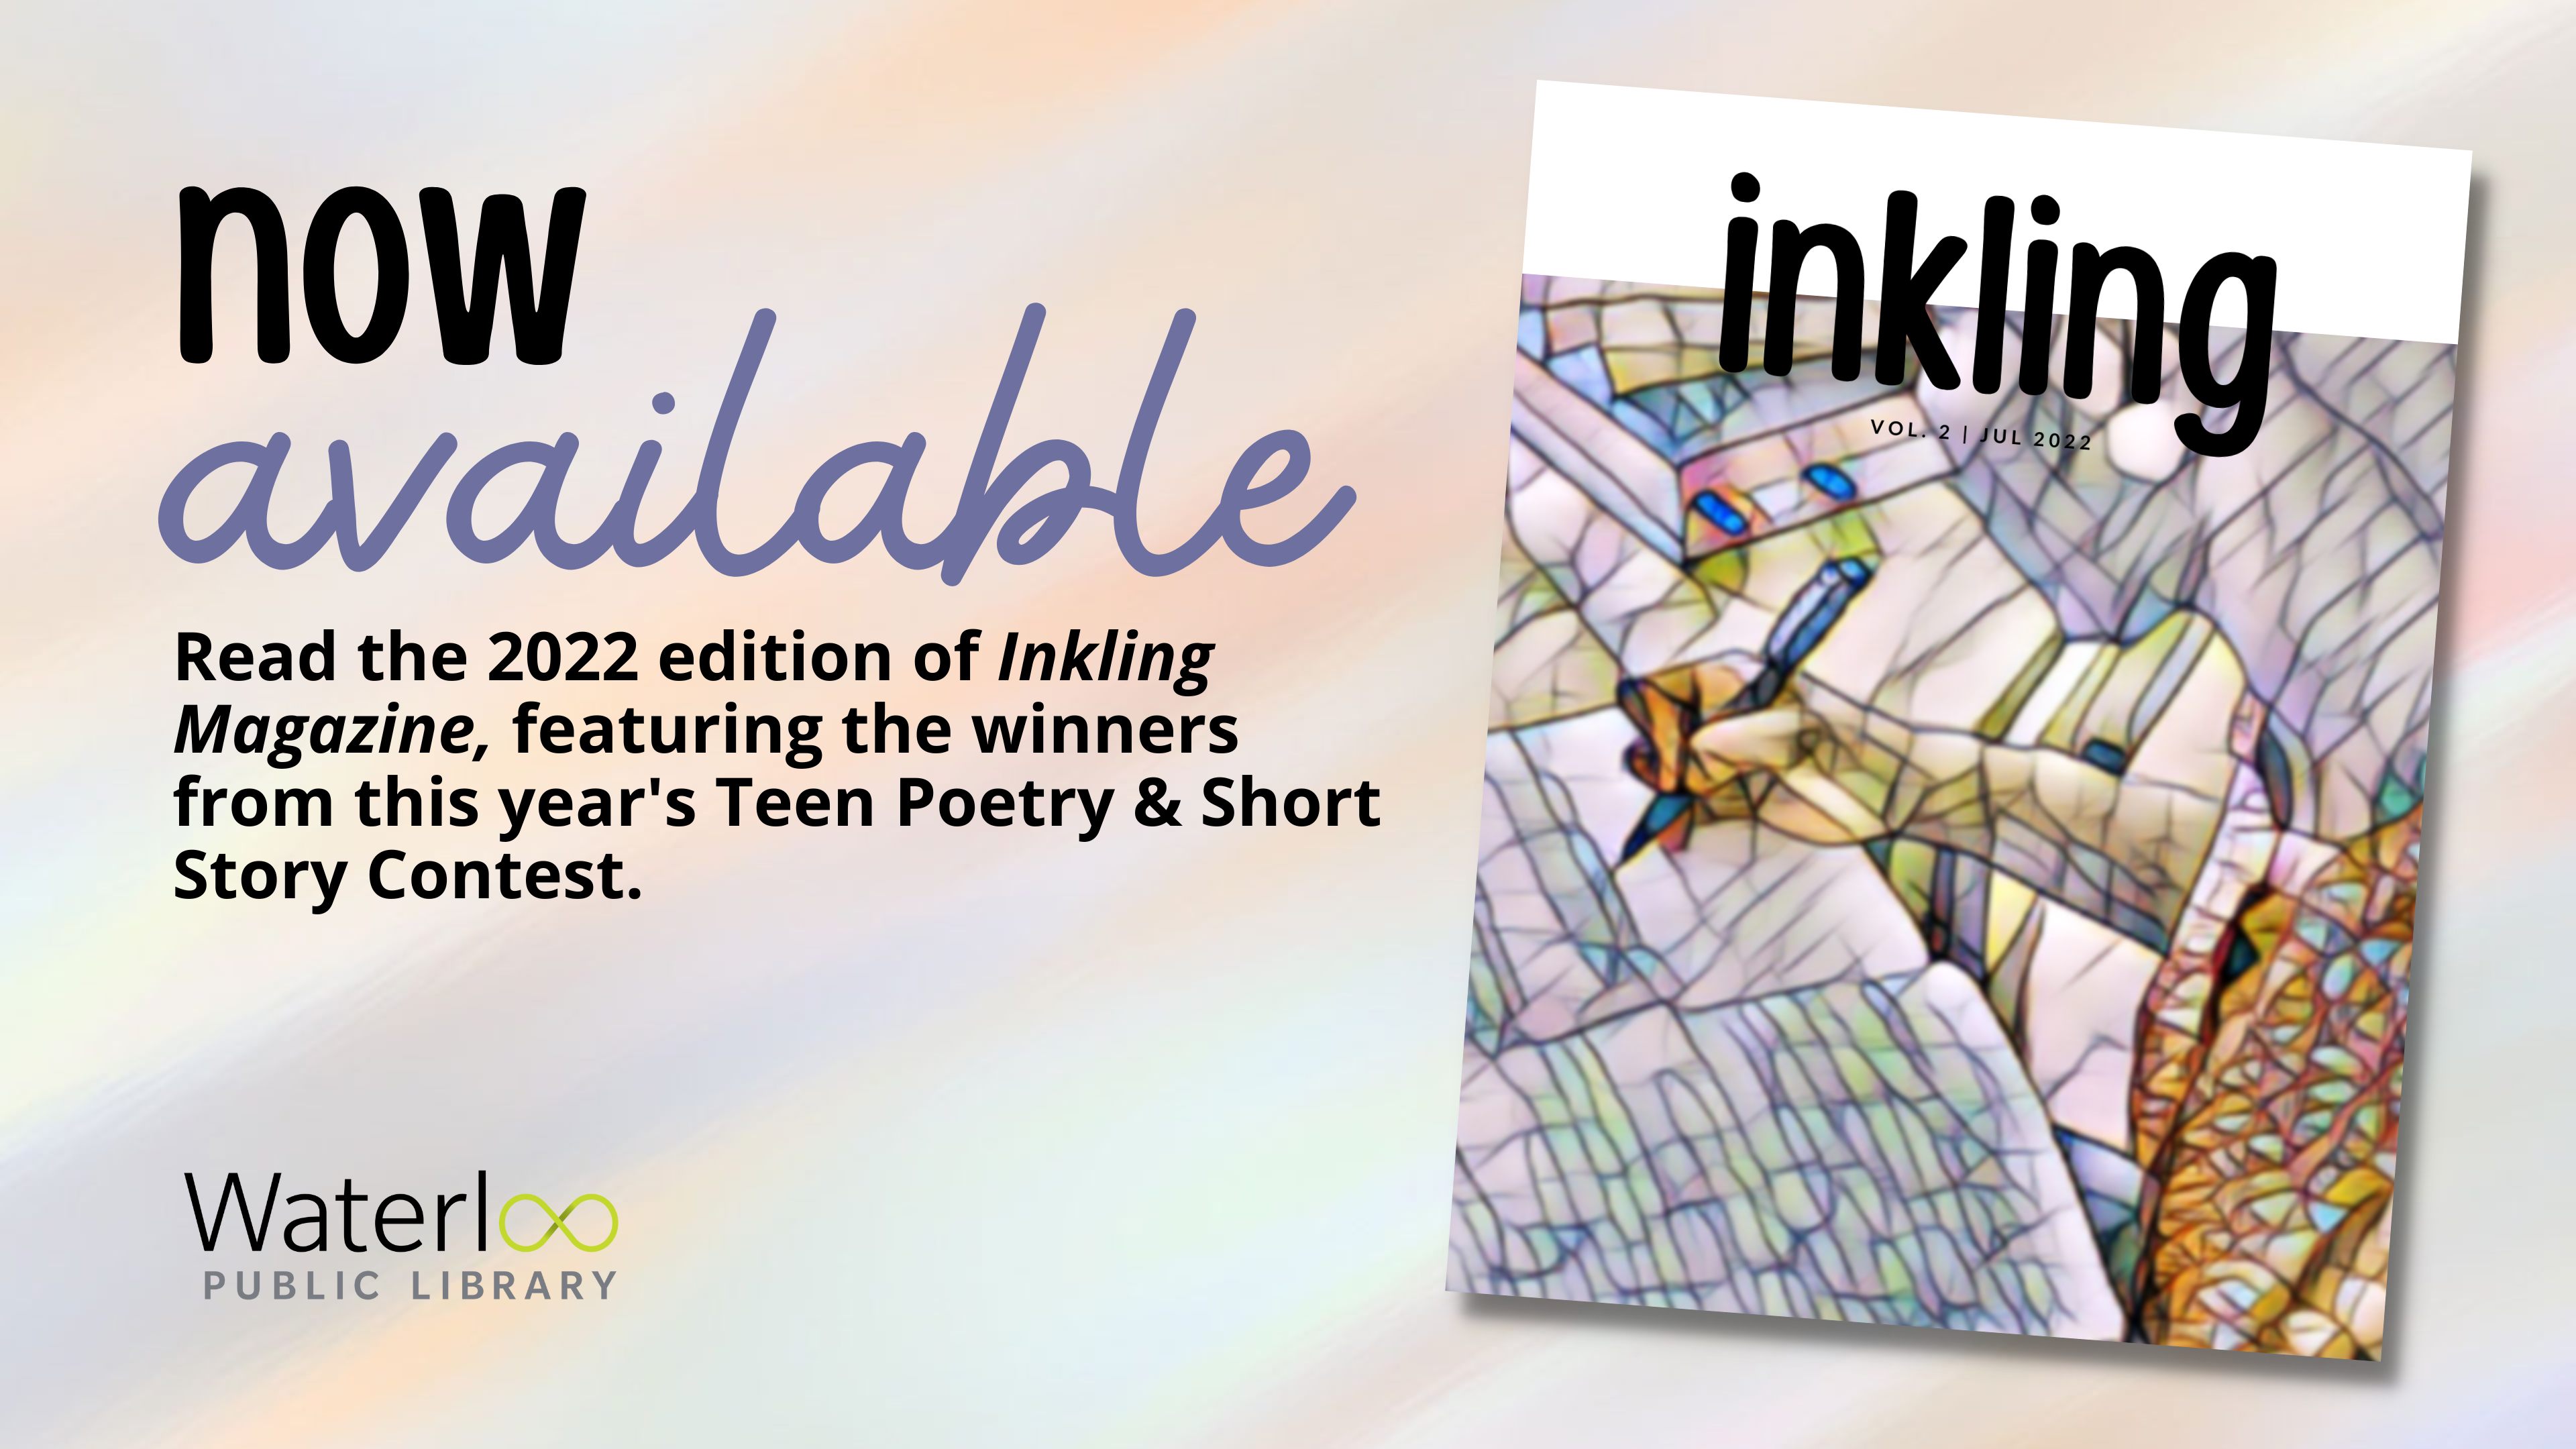 Now available - Inkling Magazine